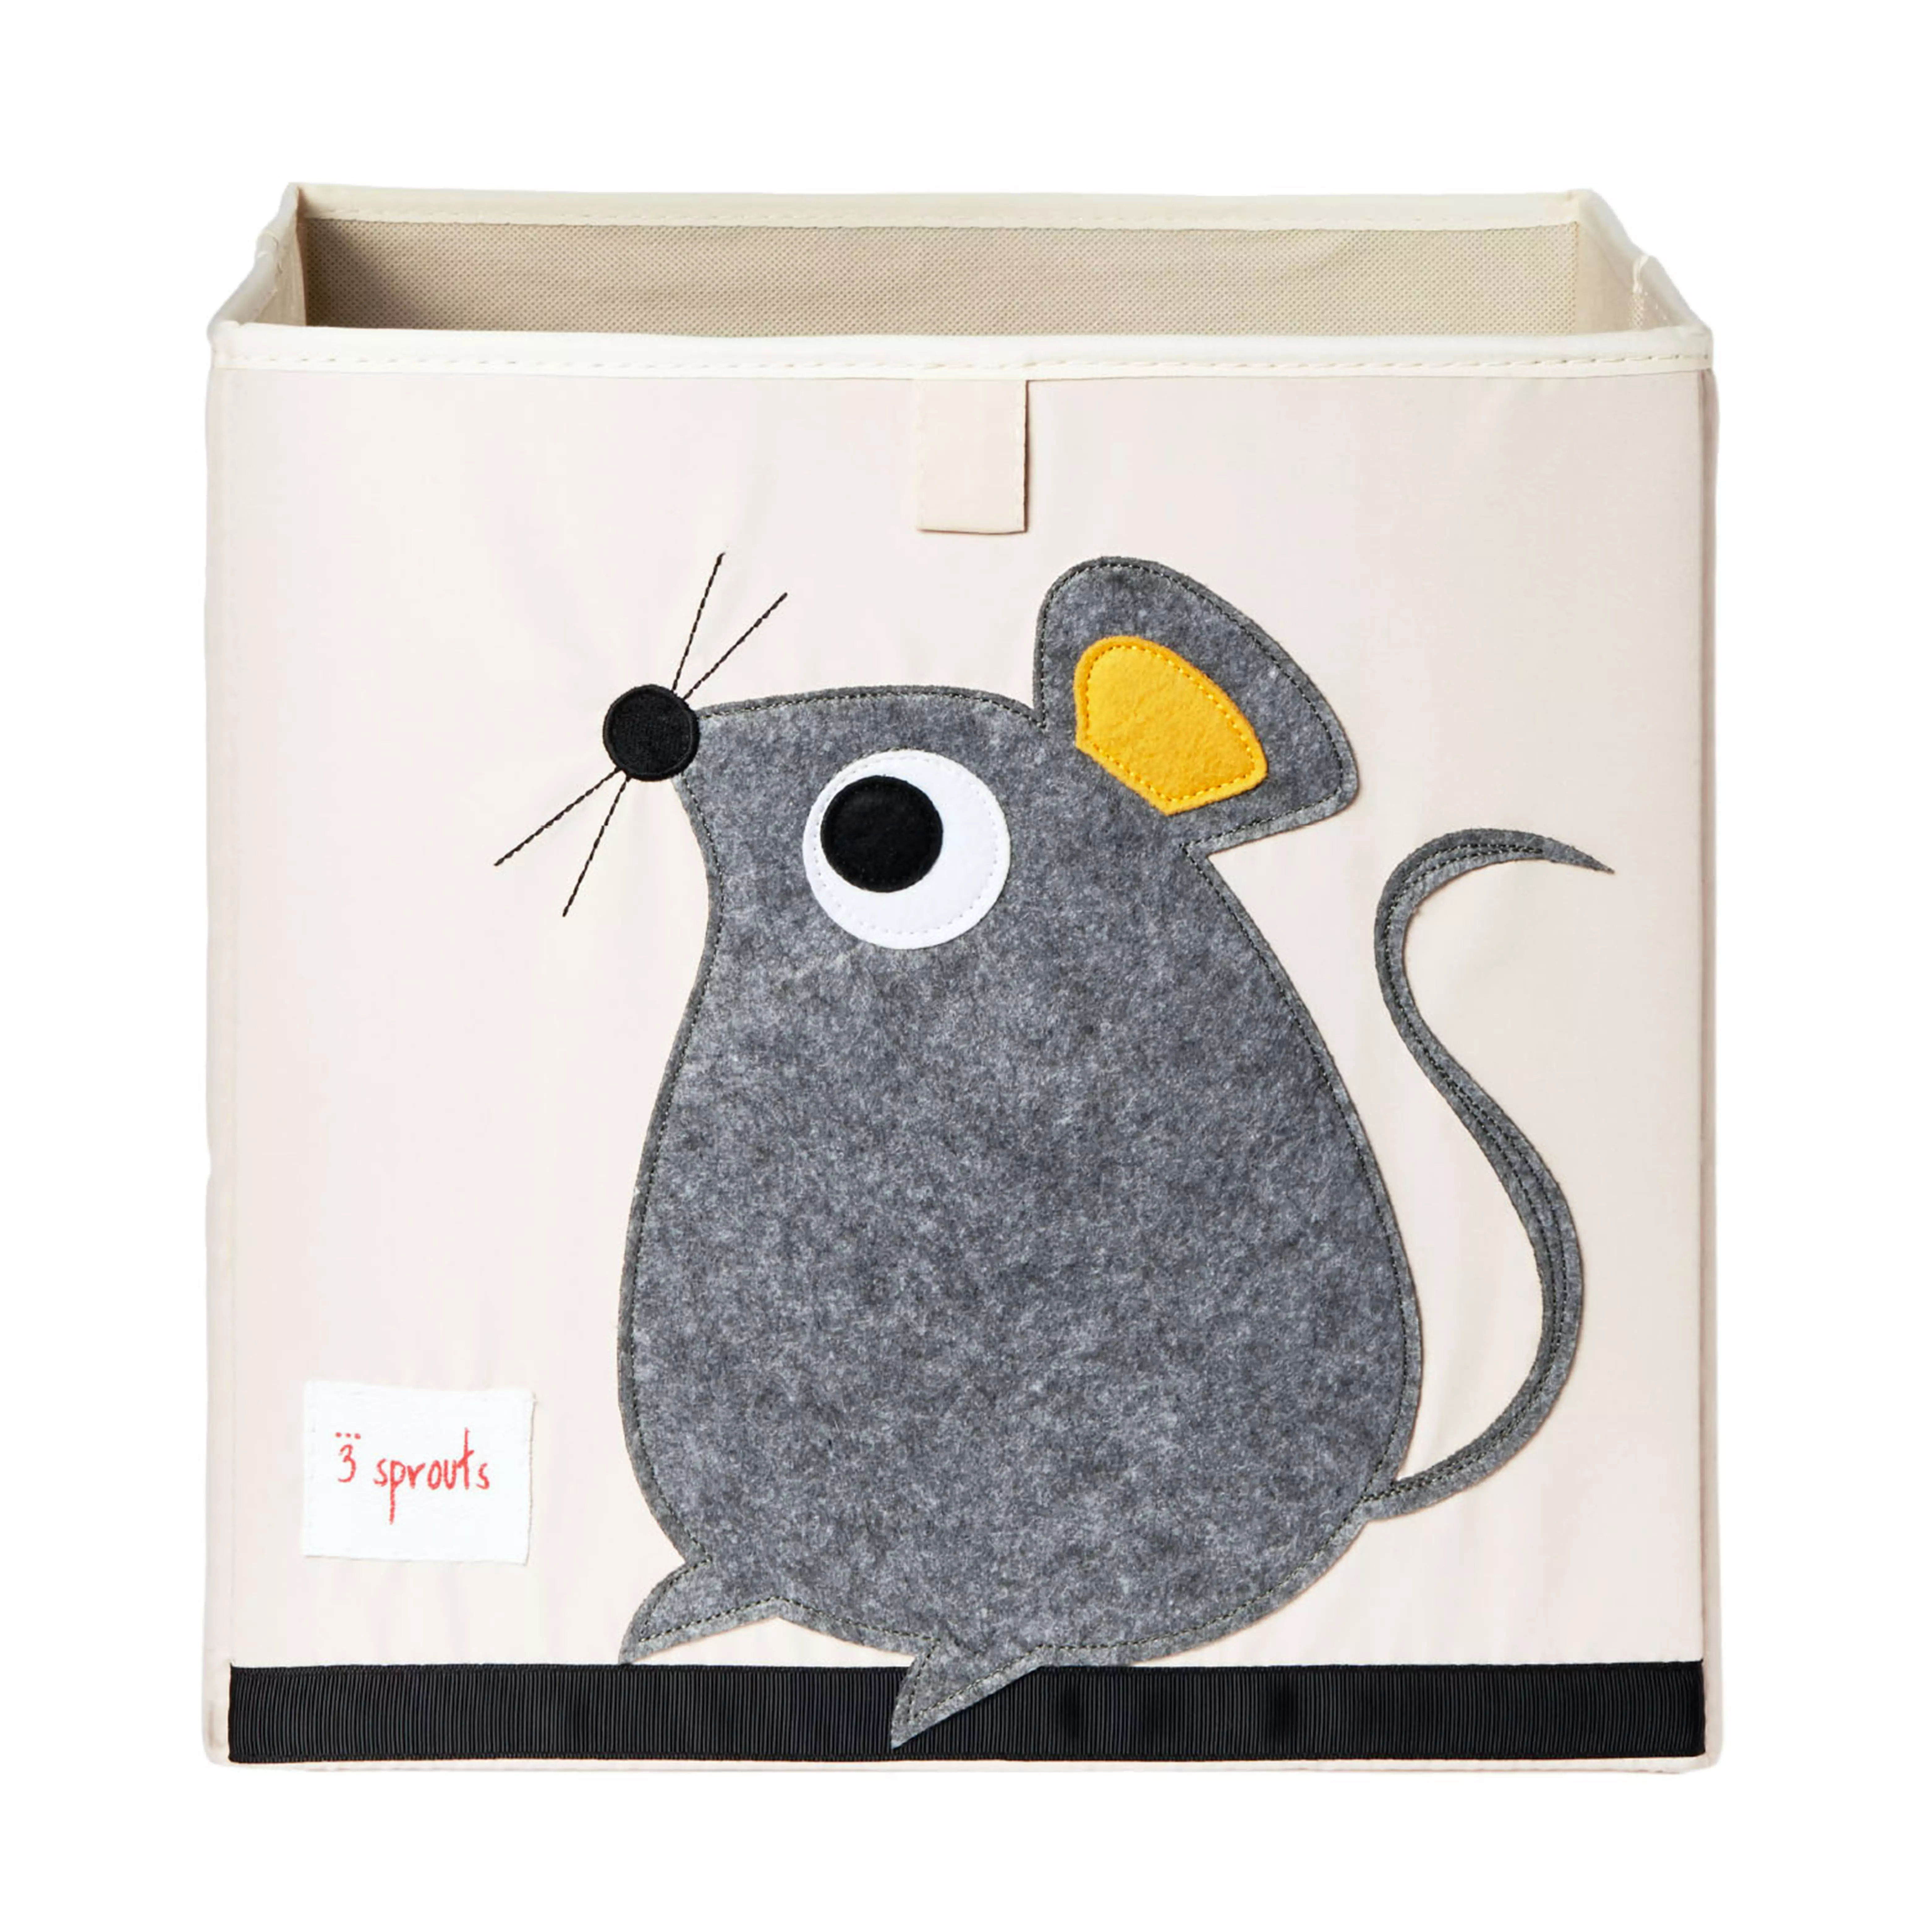 Sprouts Storage Box Gray Mouse